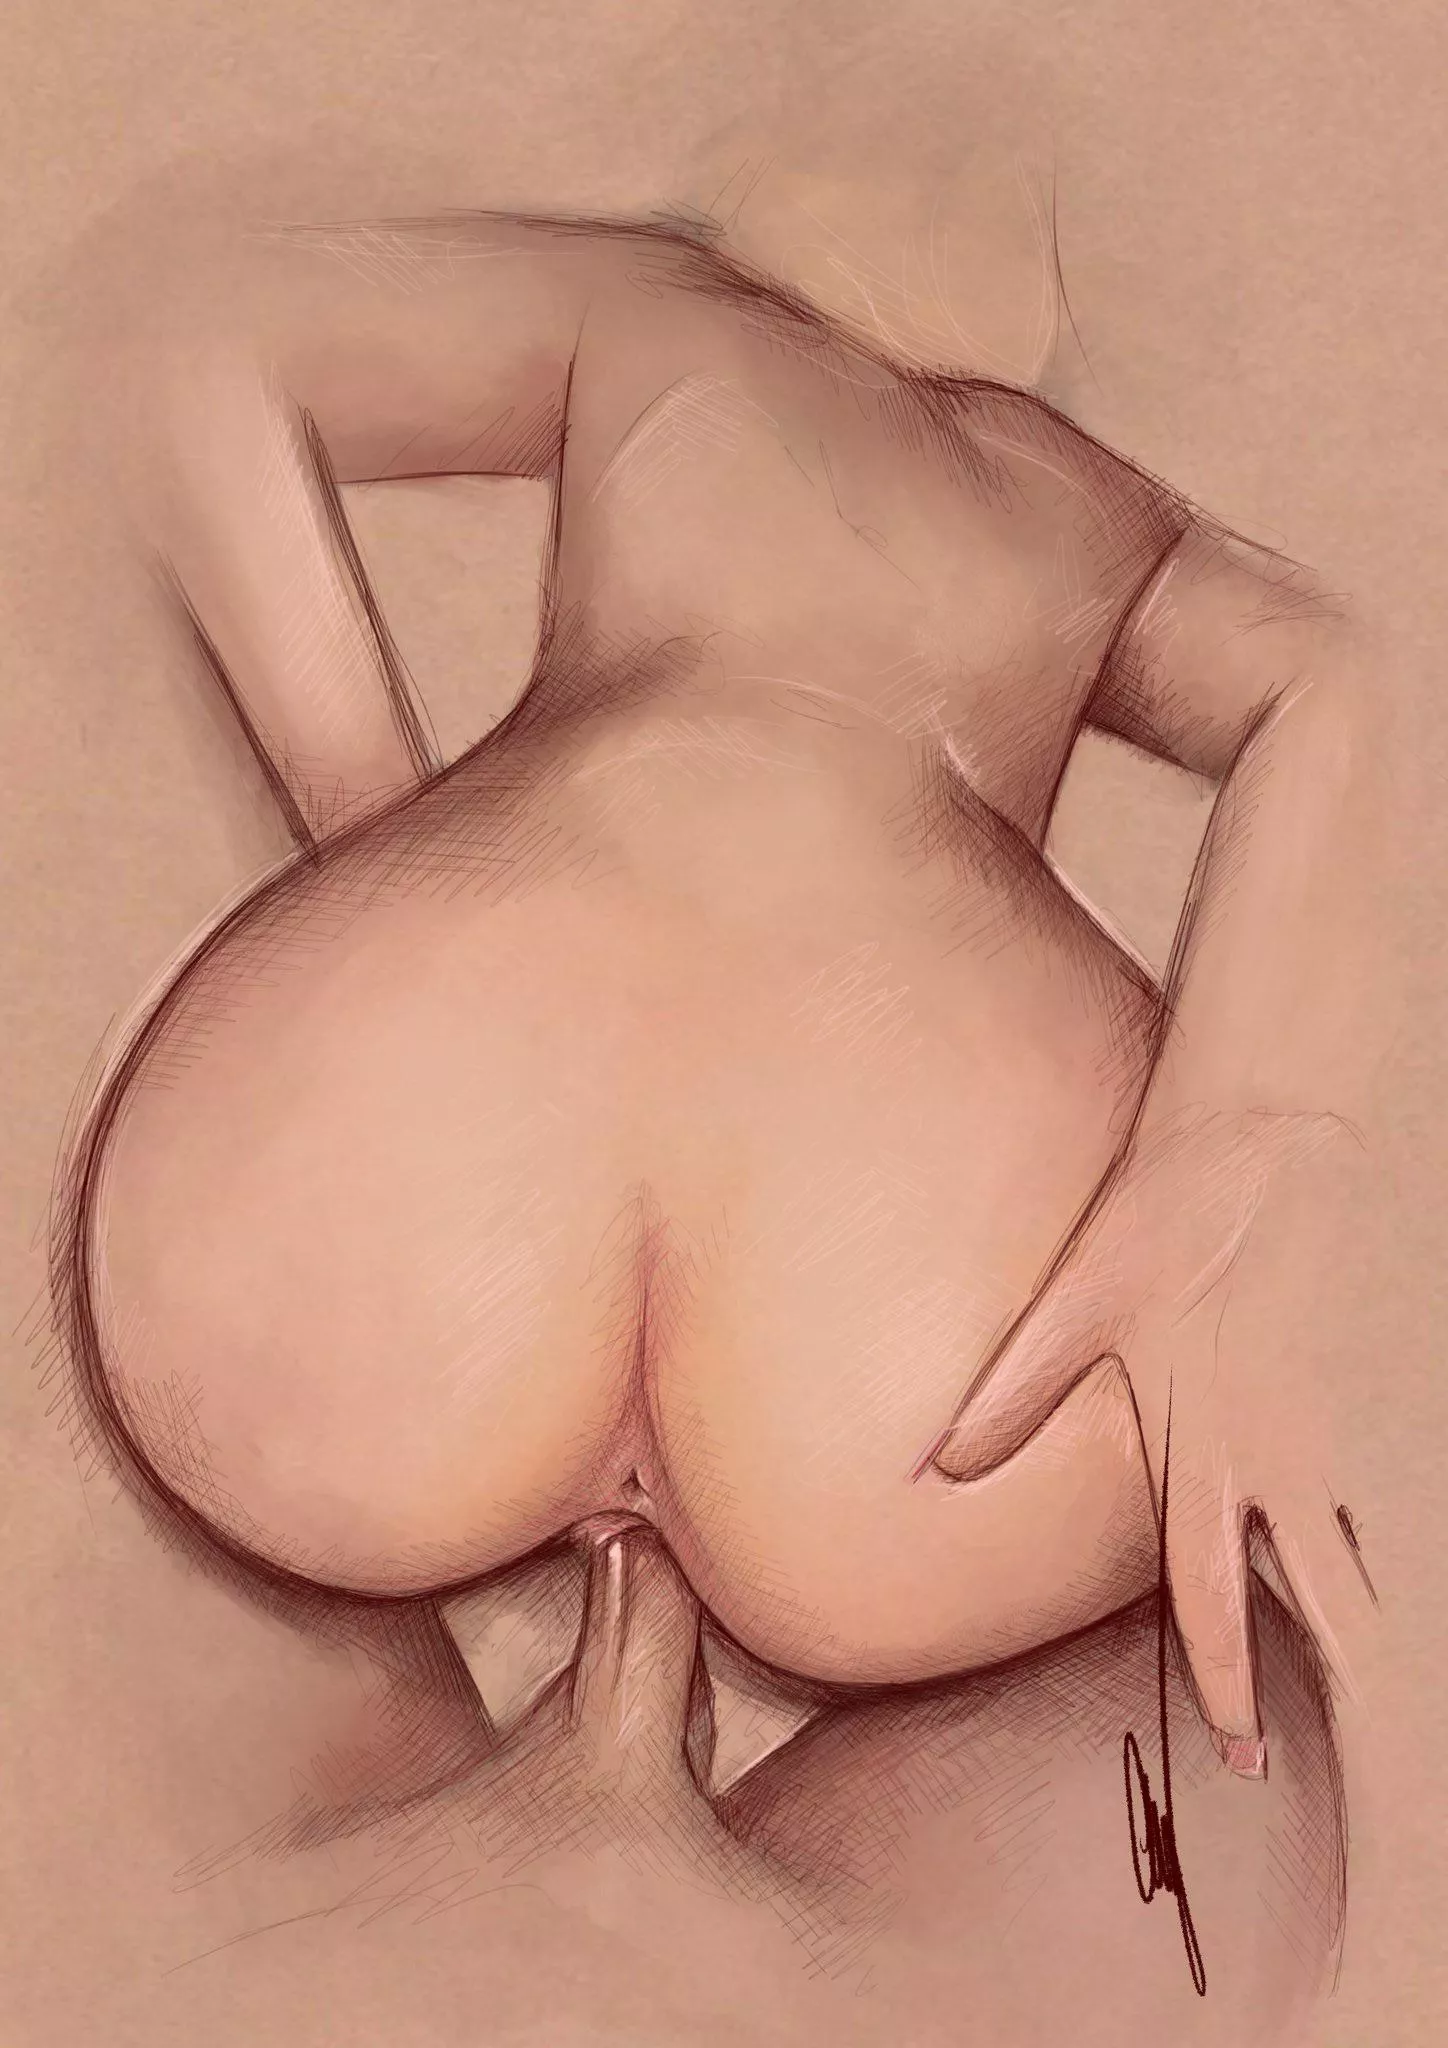 1448px x 2048px - Having your porn turned into art is amazing!! 10/10 recommend ! nudes by  TheASSassinNSFW